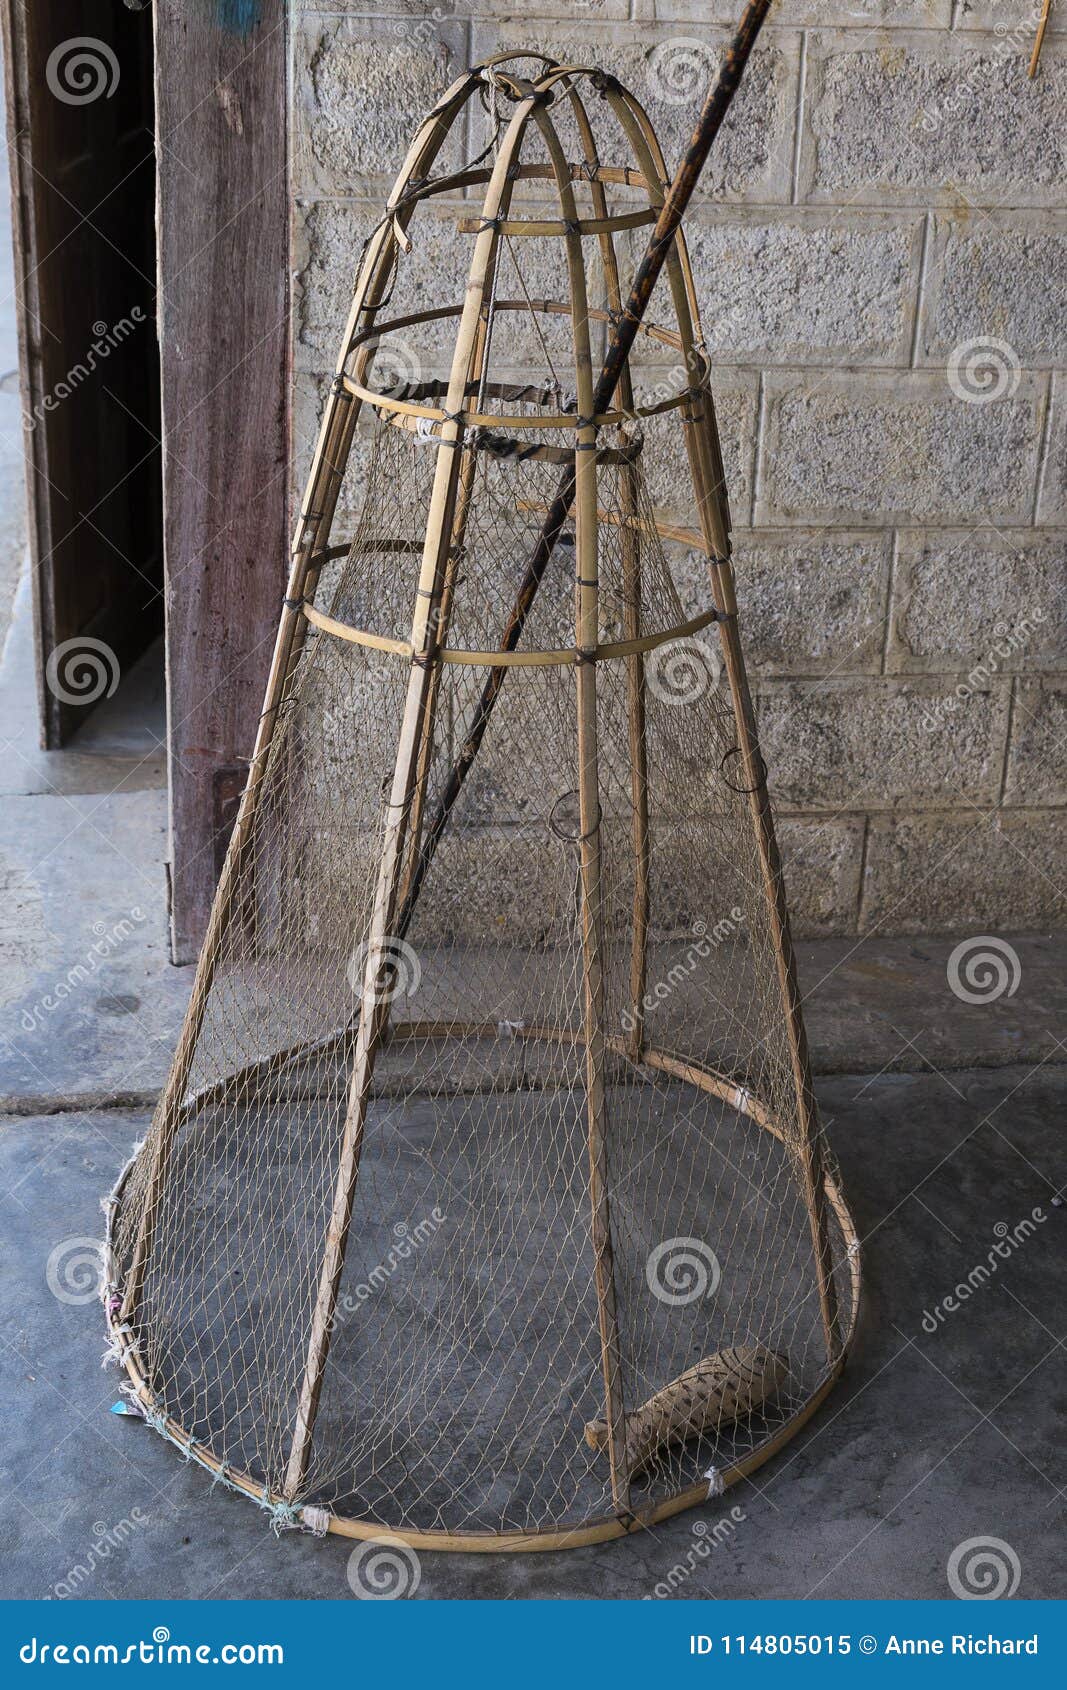 https://thumbs.dreamstime.com/z/inle-lake-traditional-conical-fishing-net-stick-wooden-fish-inle-lake-traditional-conical-fishing-net-stick-114805015.jpg